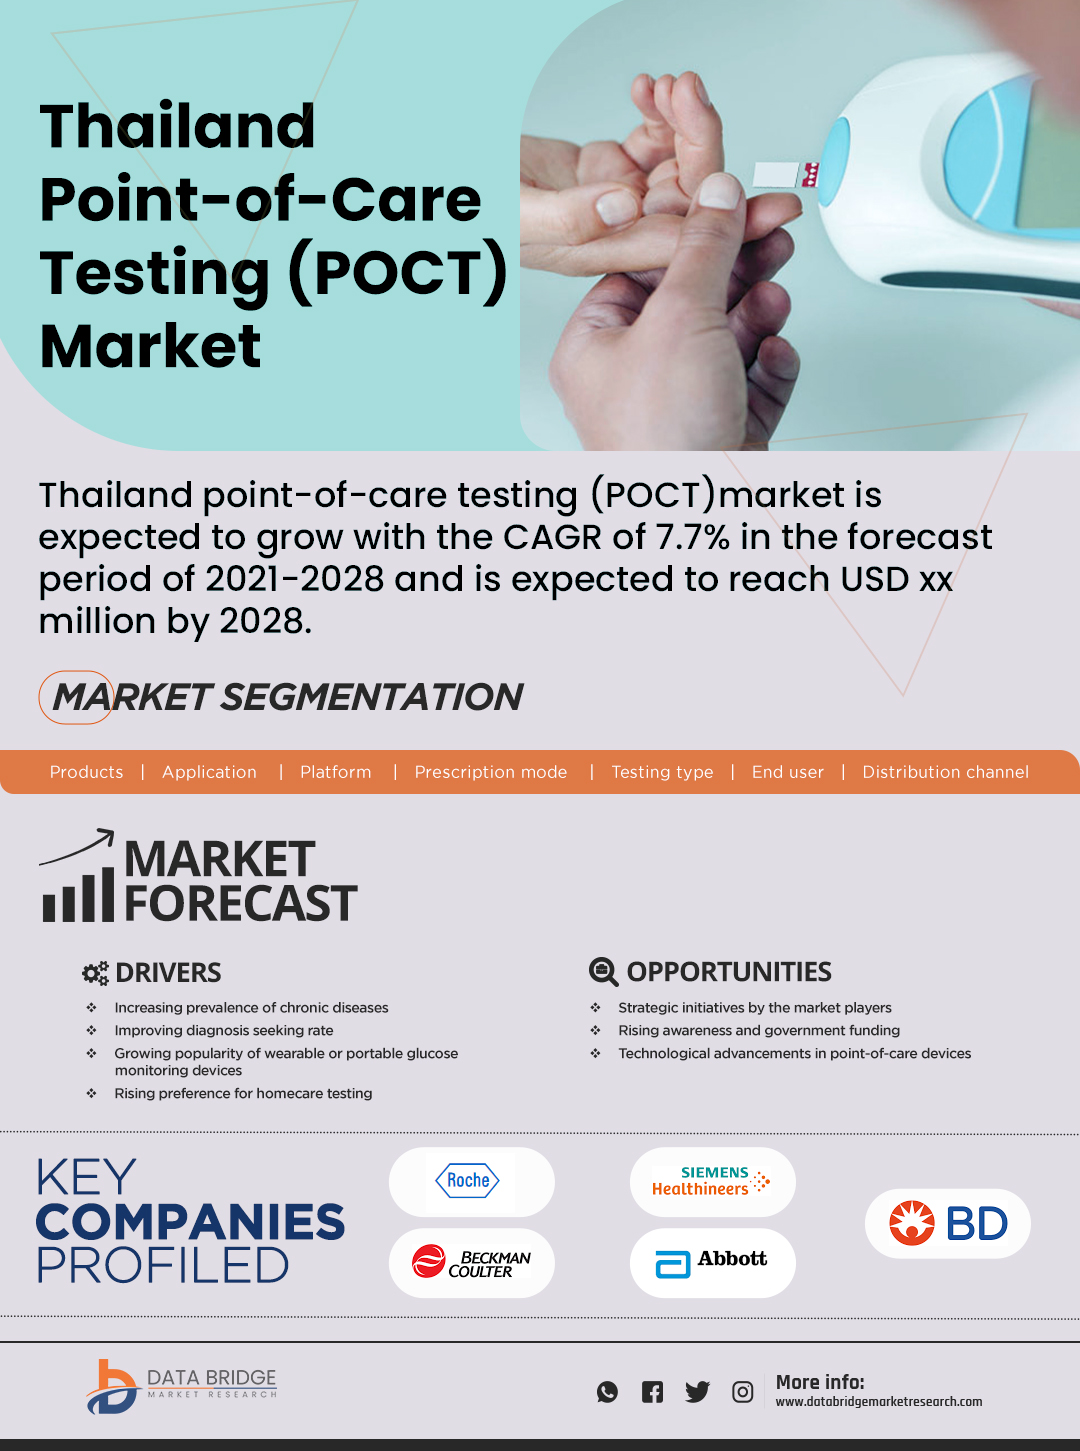 Thailand Point-of-Care Testing (POCT) Market